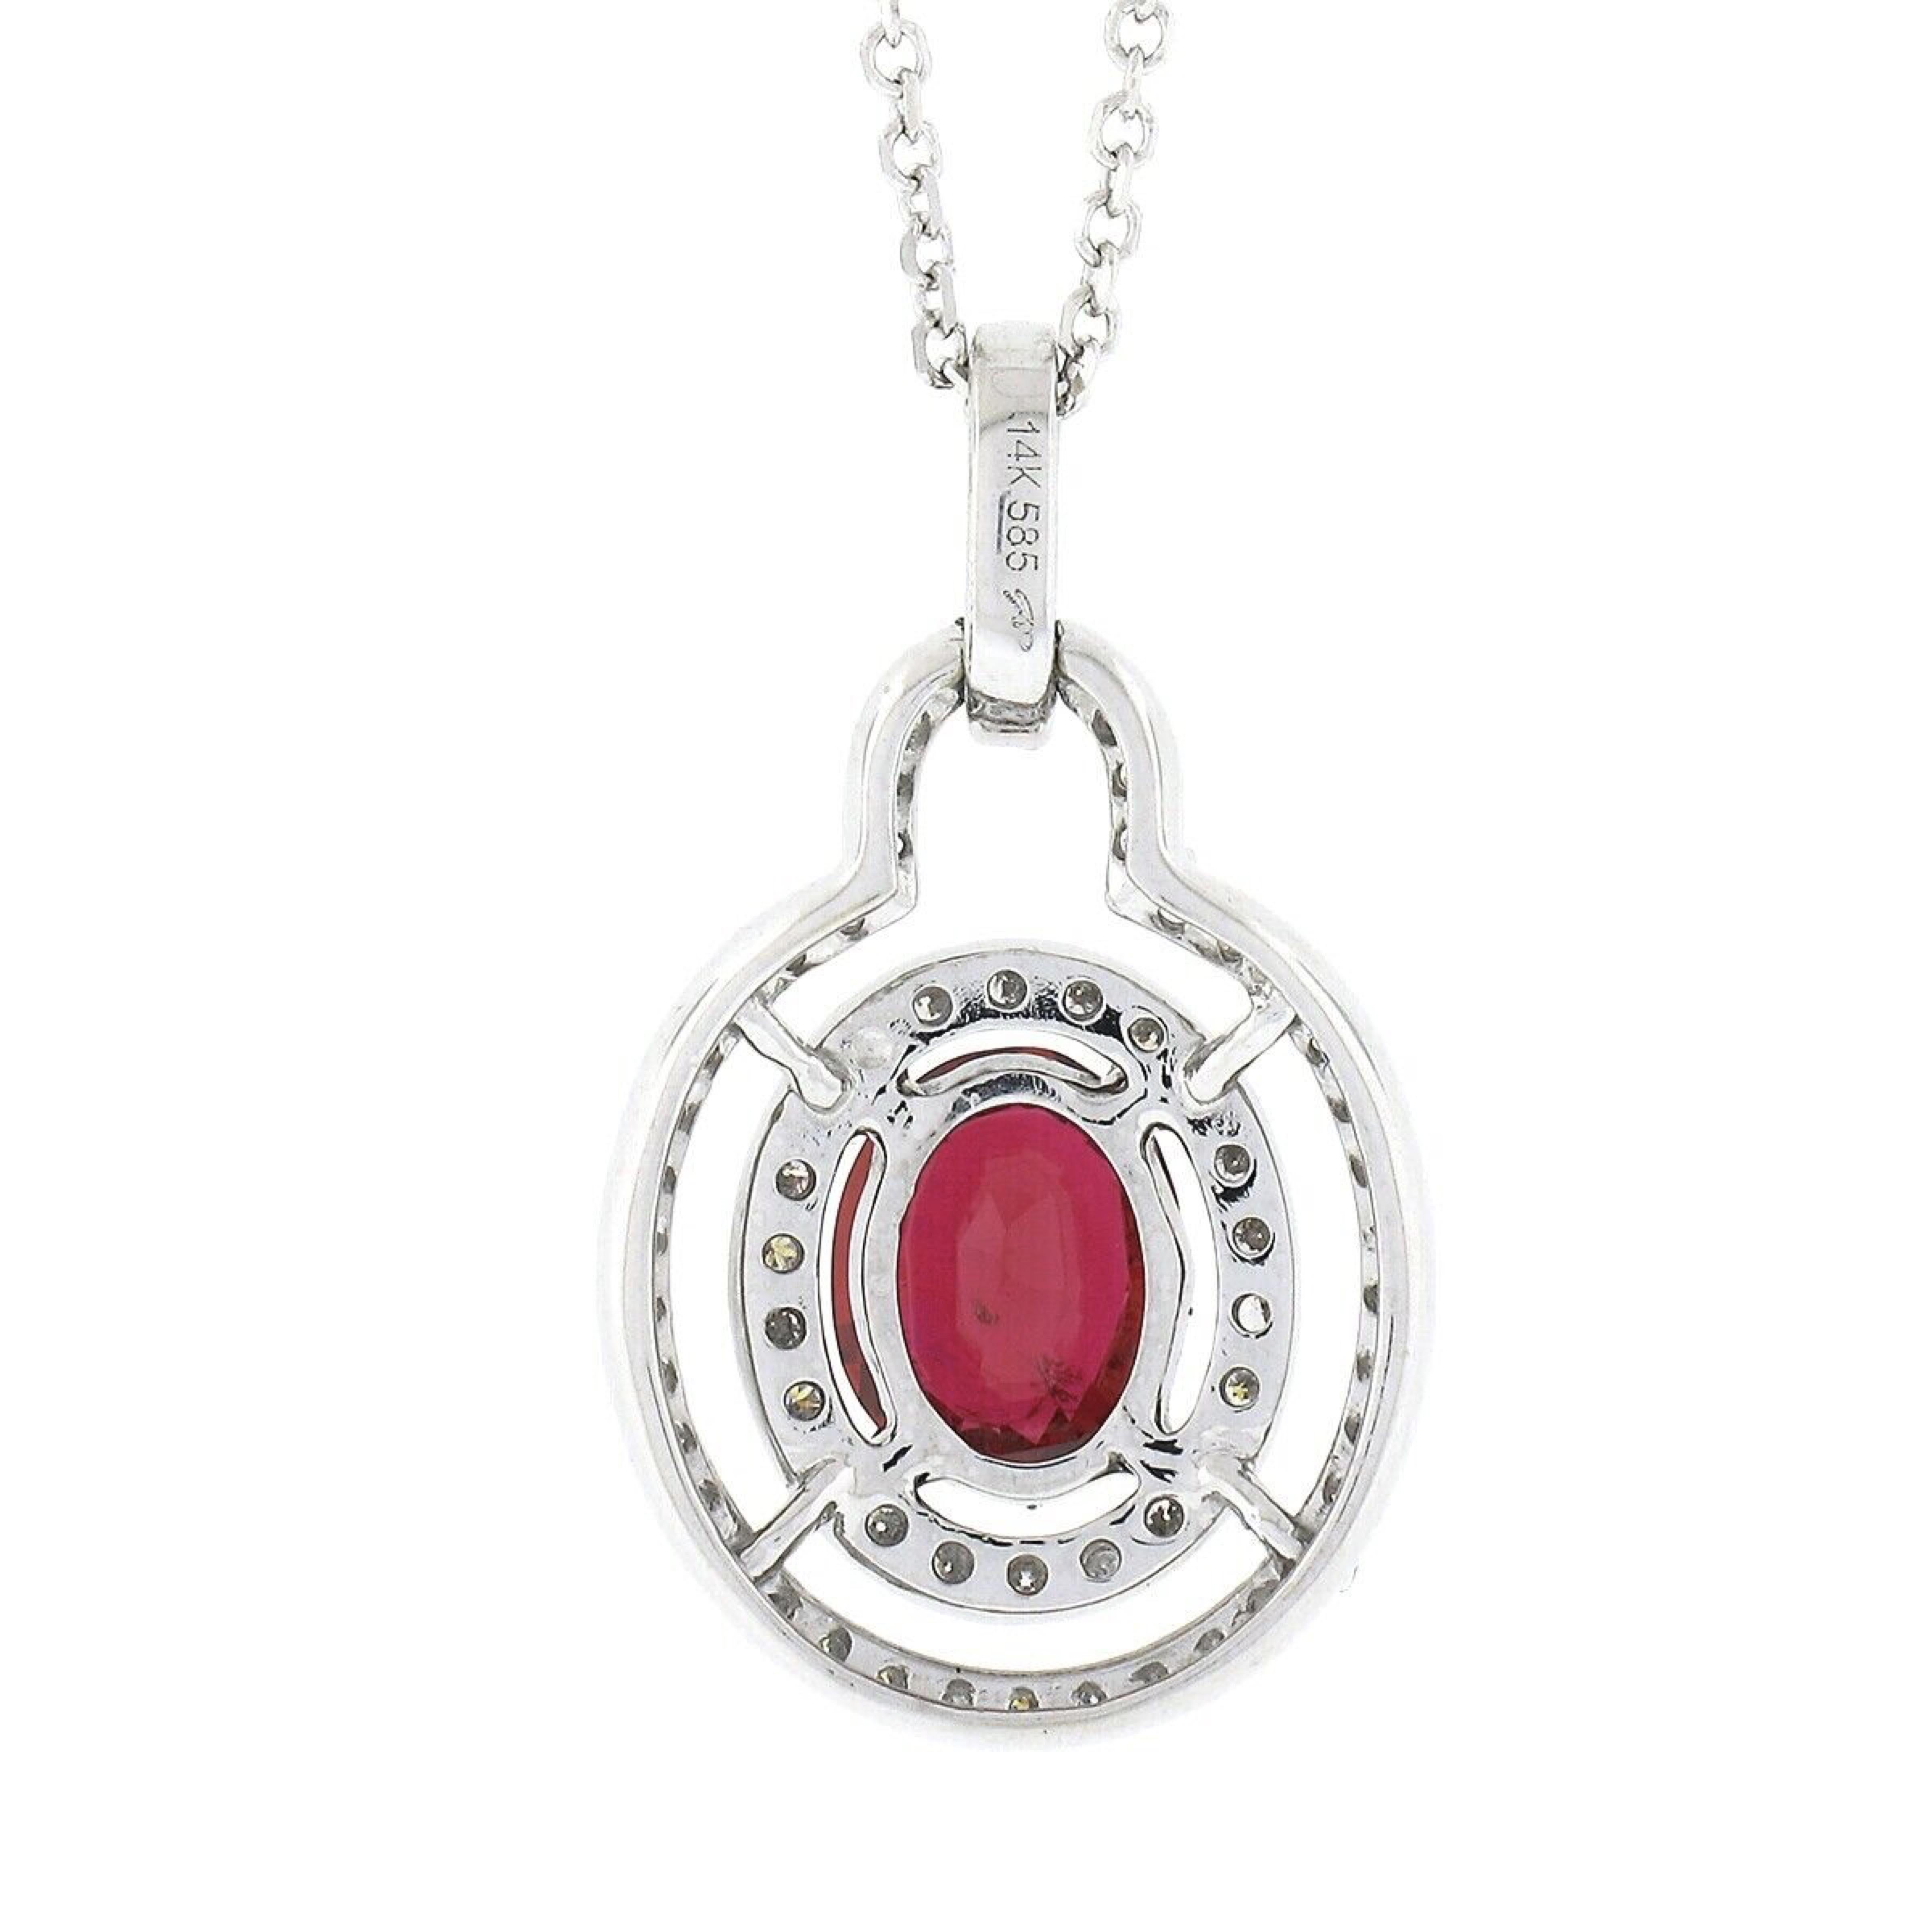 14K White Gold GIA Burma Cherry Red Spinel & Double Diamond Halo Pendant & Chain For Sale 1